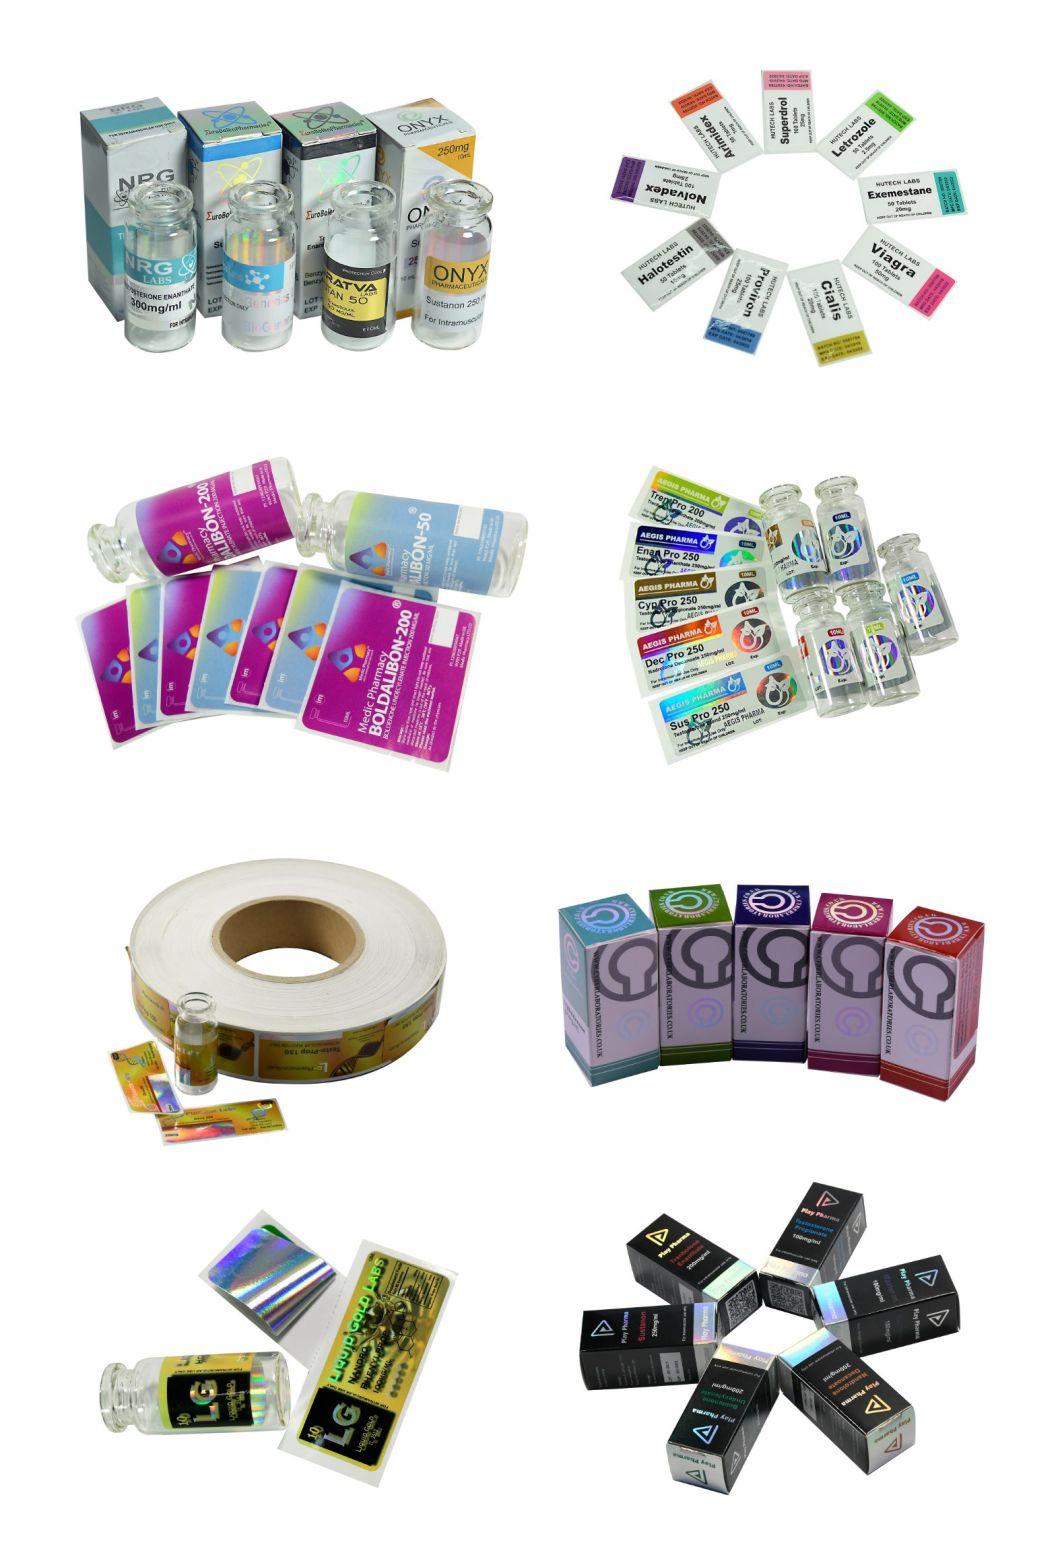 Waterproof Holographic Logos Sticker Transparent Hologram Overlay Label 10ml Vial Labels and Boxes